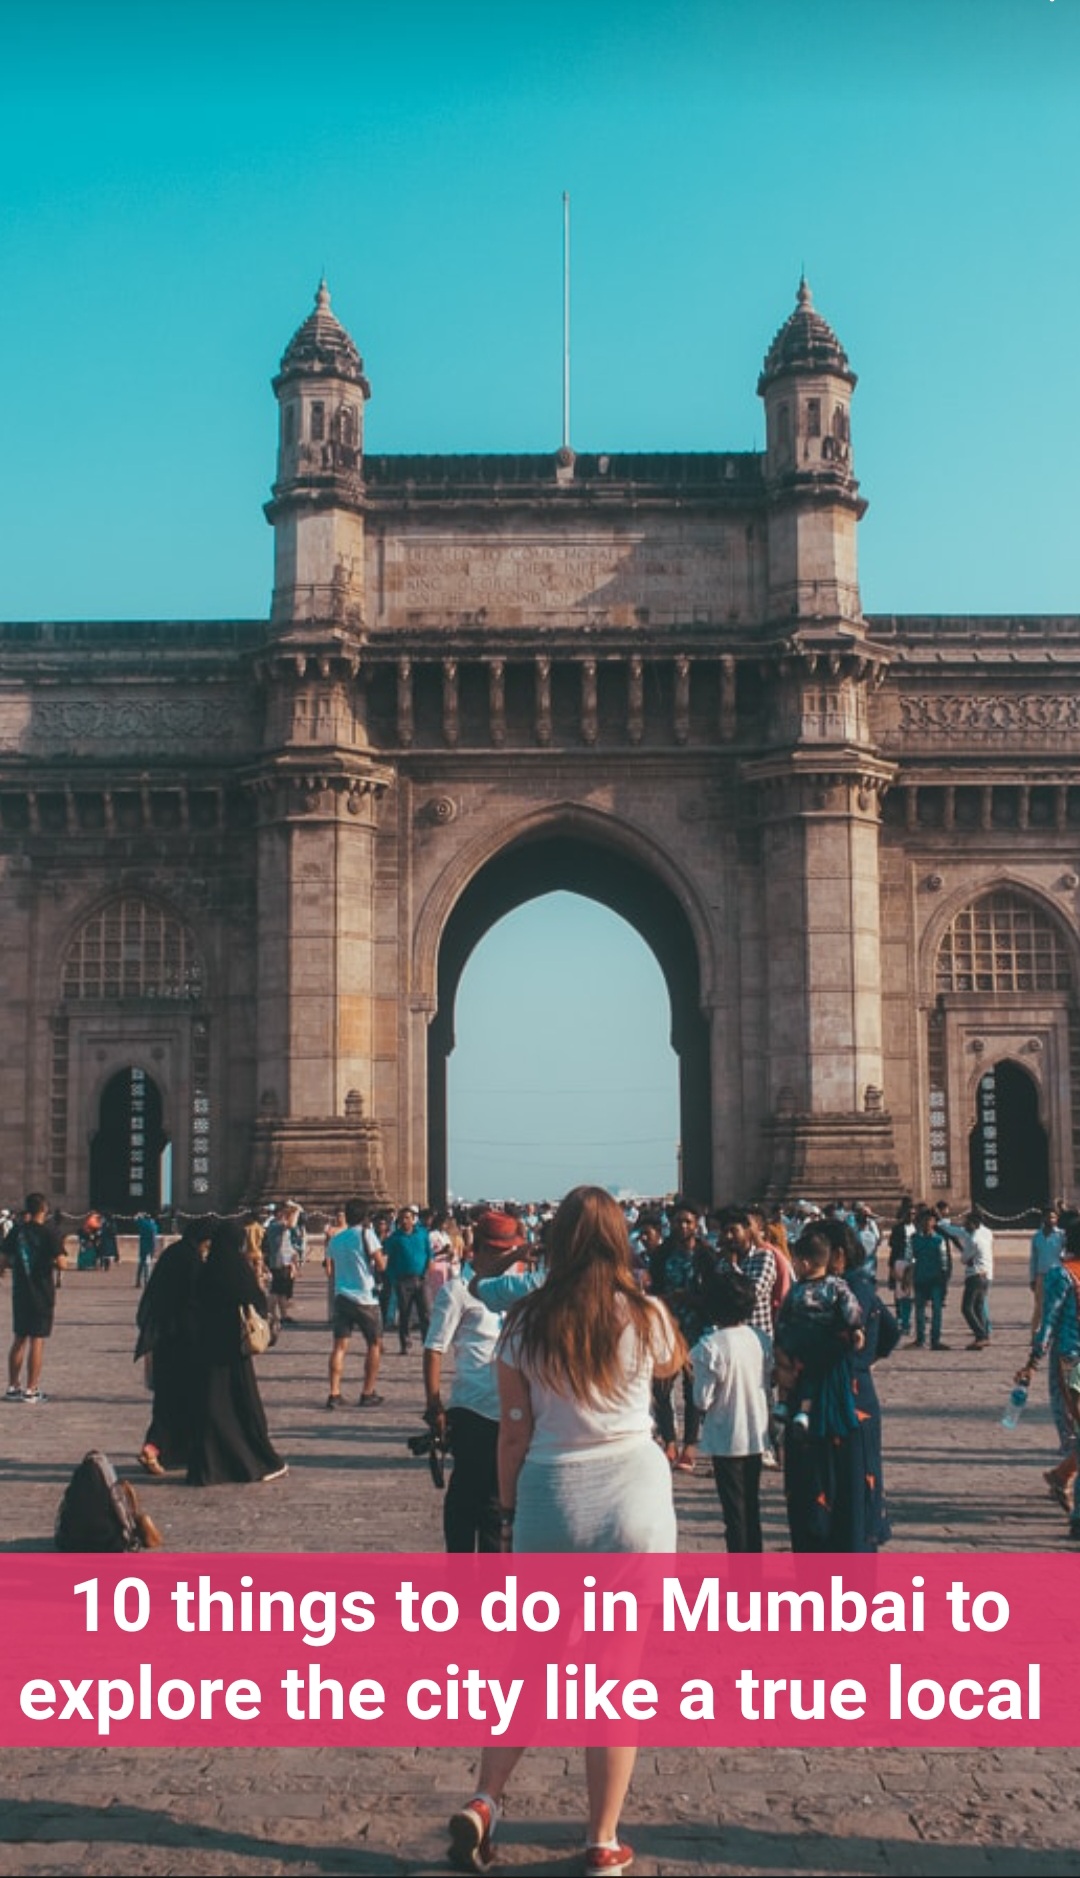 10 things to do in Mumbai to explore the city like a true local